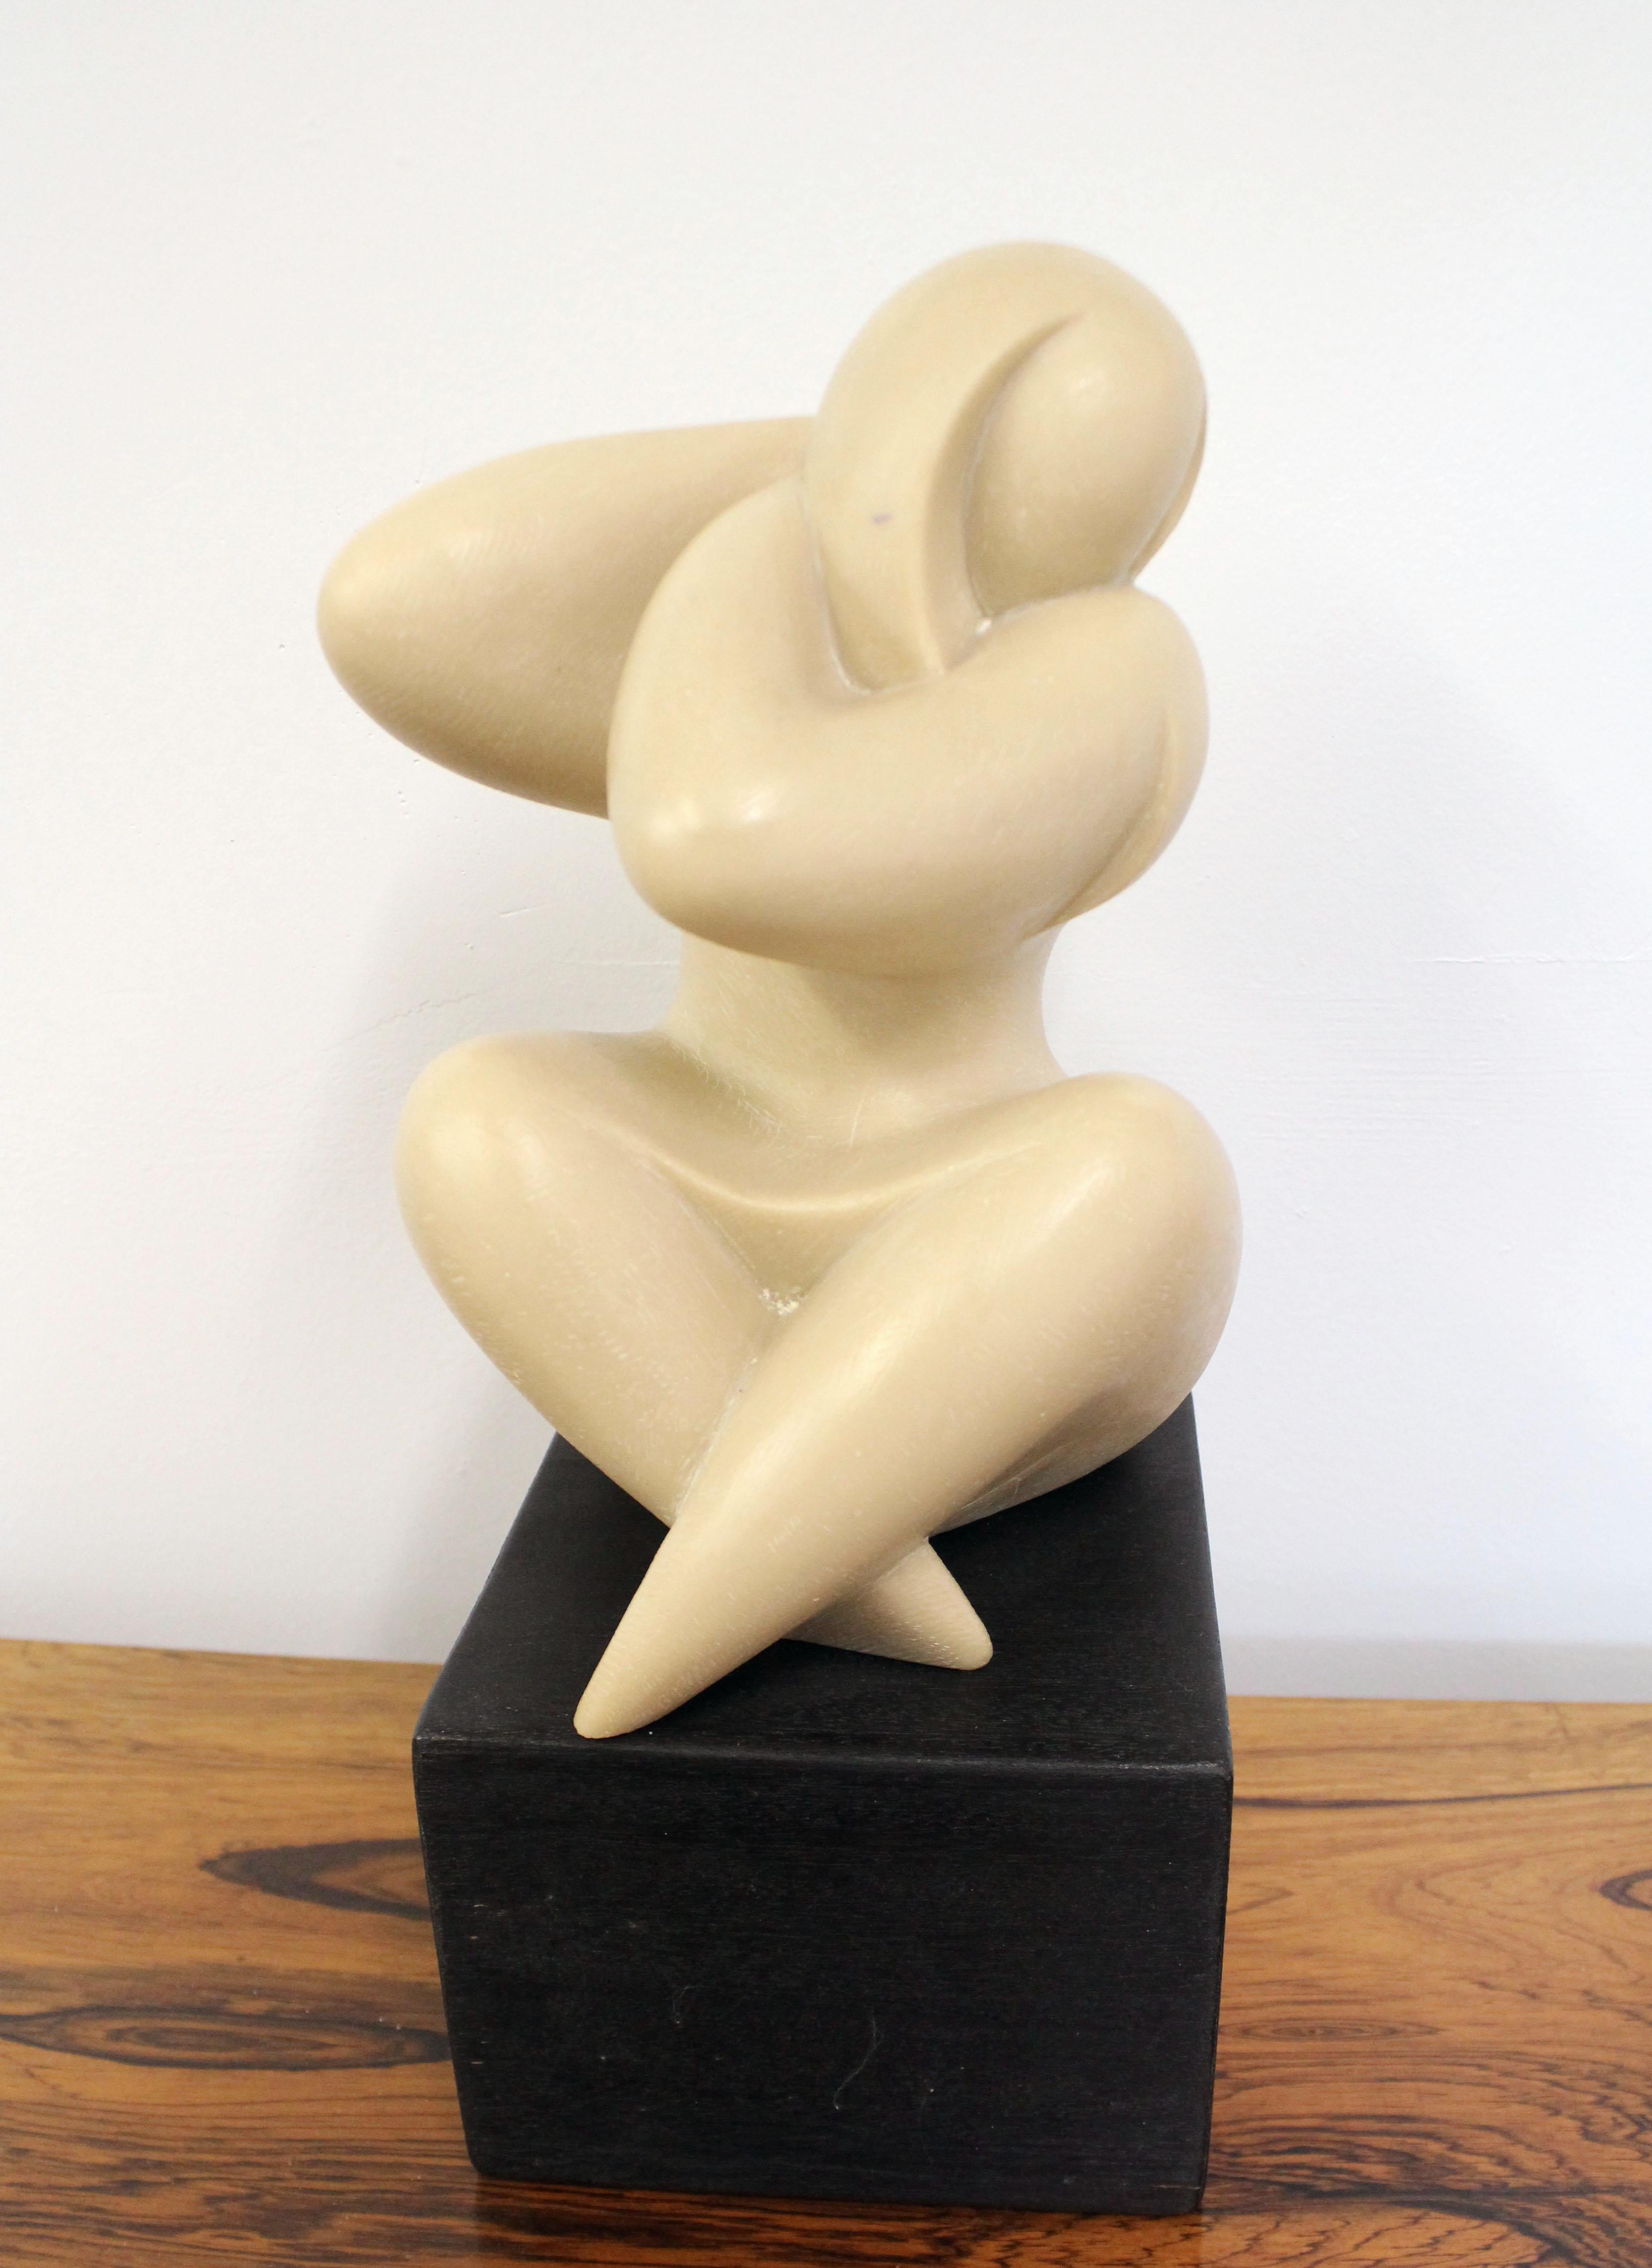 Offered is a vintage Mid-Century Modern sculpture by J. Martinek. This piece features a resin composite sculpture of a seated curvy woman on a wood block. It is in good condition for its age but shows some flaws - imperfection/crack in back